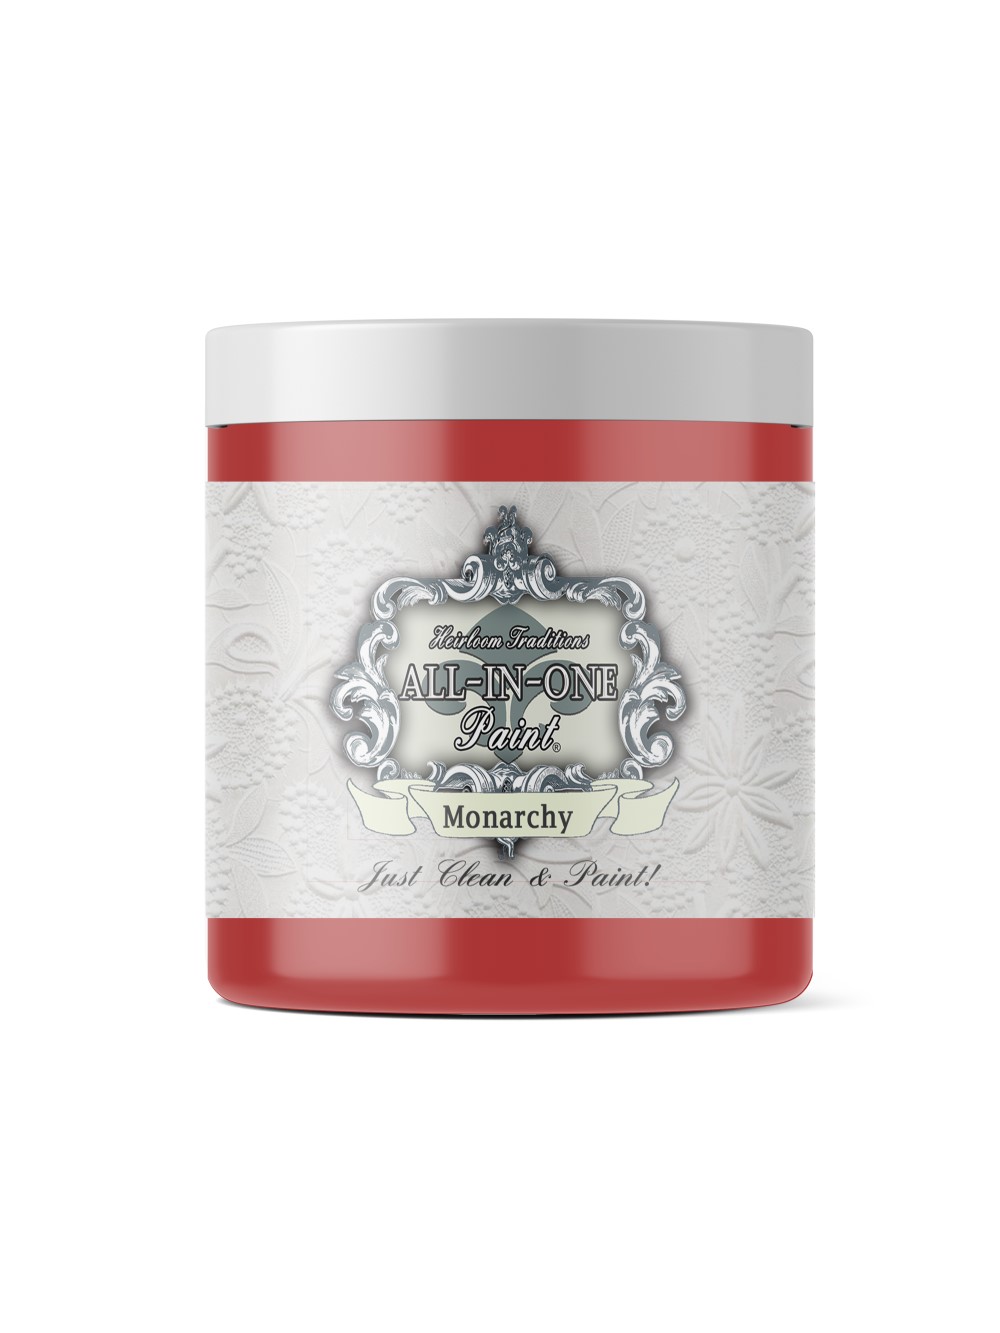 Heirloom Traditions Paint ALL-IN-ONE Paint, Monarchy (Primary Red), 8 Fl Oz Sample